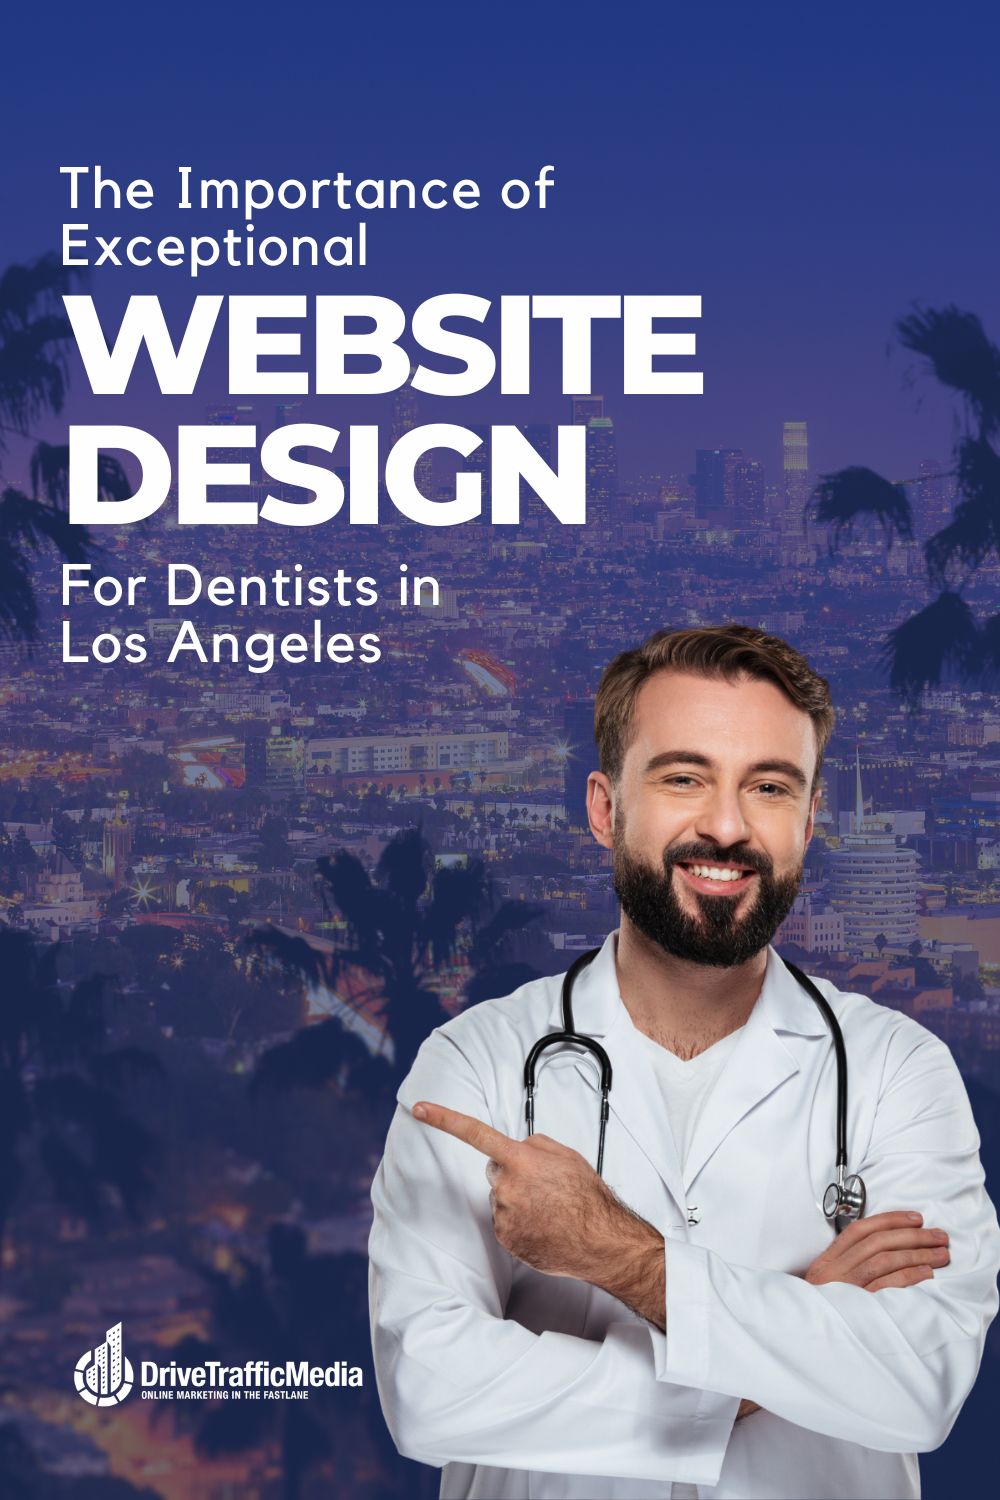 dentists-in-Los-Angeles-need-website-design-Pinterest-Pin